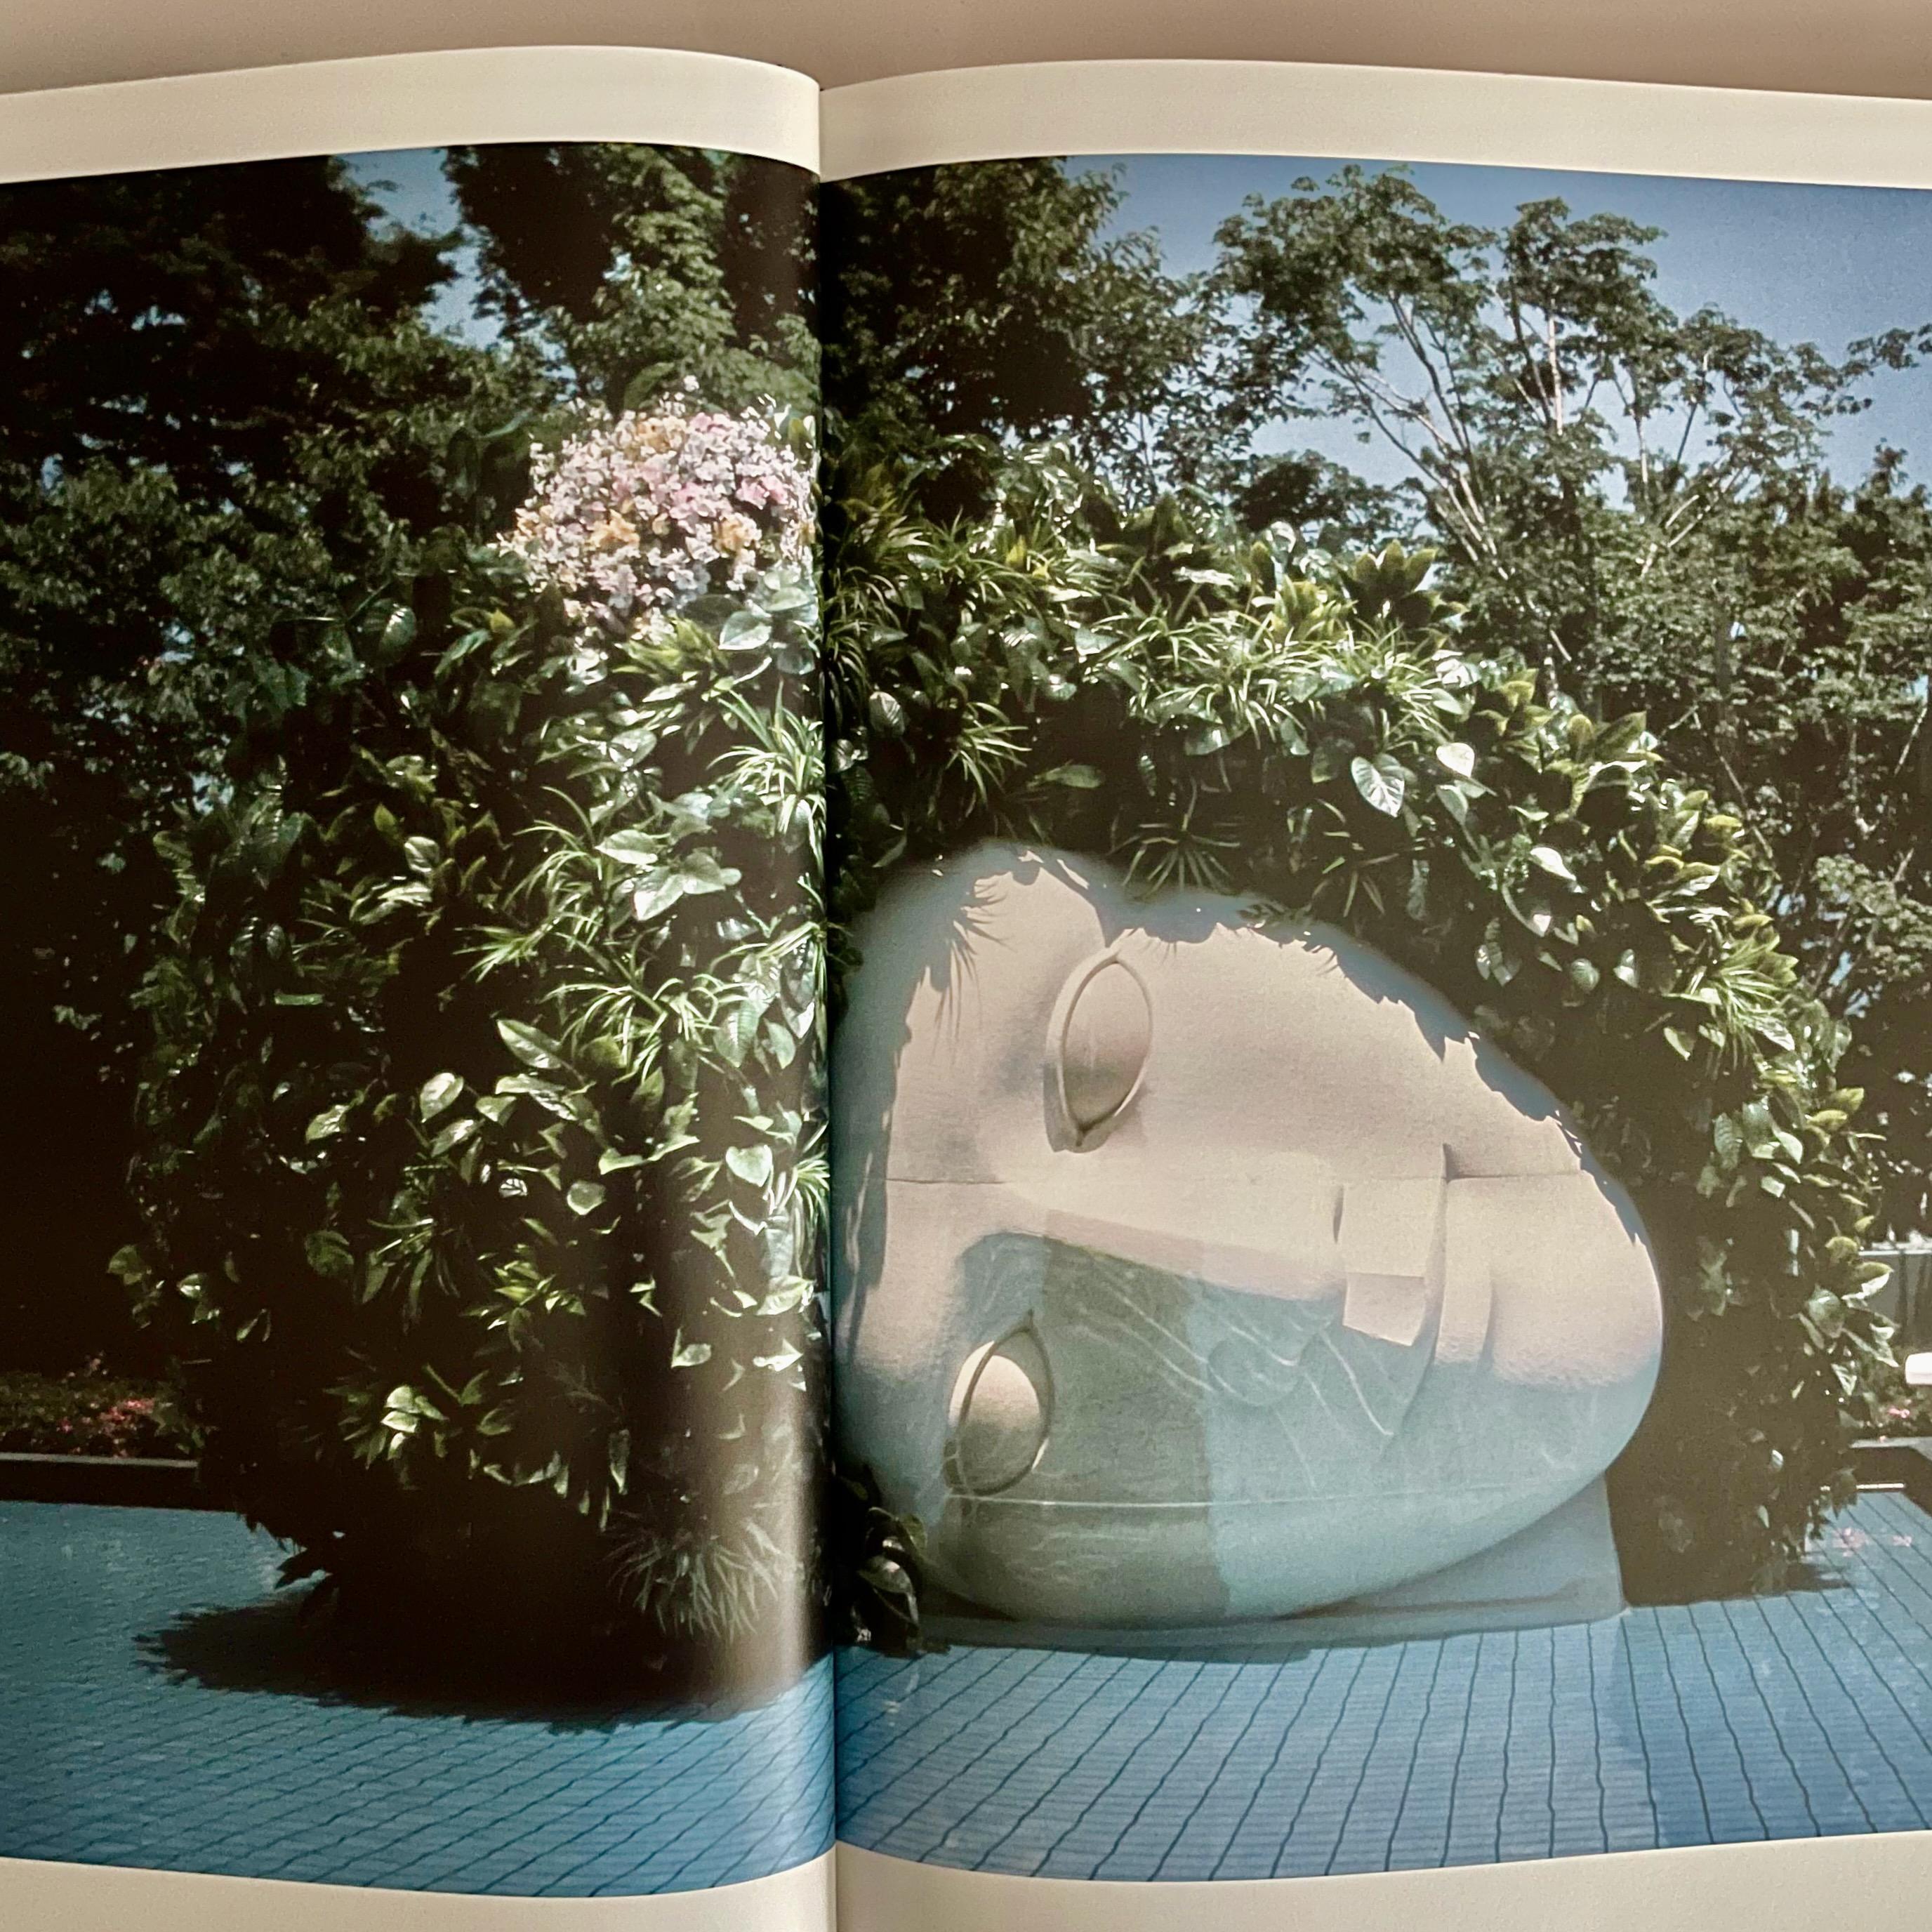 First Edition Hardback in Dust Jacket. Published by Flammarion, Paris, 2008. Text in English.

One of the great artistic partnerships, Claude and Francois-Xavier Lalanne have been perceived as one since their first exhibition in 1964. Favourites of